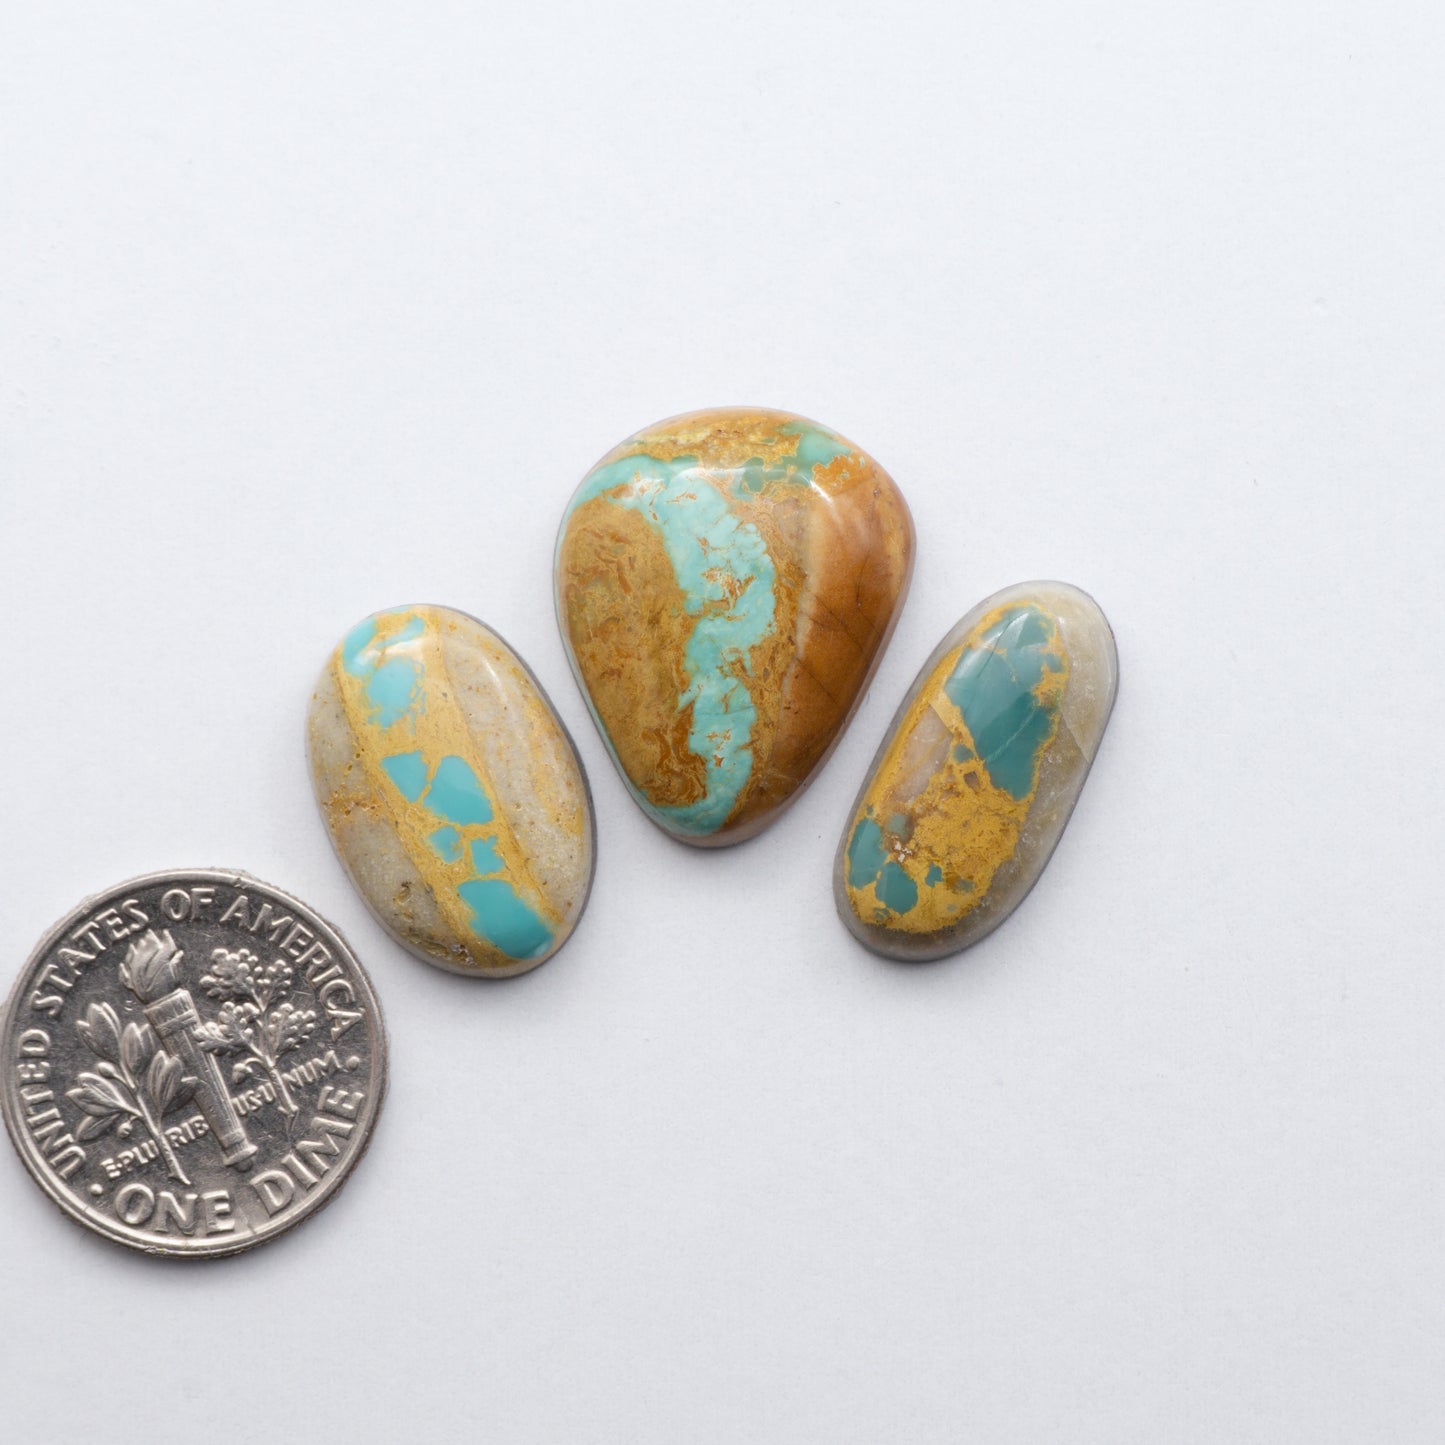 Royston Ribbon Turquoise cabochons are renowned for their unique shades of green, blues, making these cabochons a popular choice for jewelry makers.